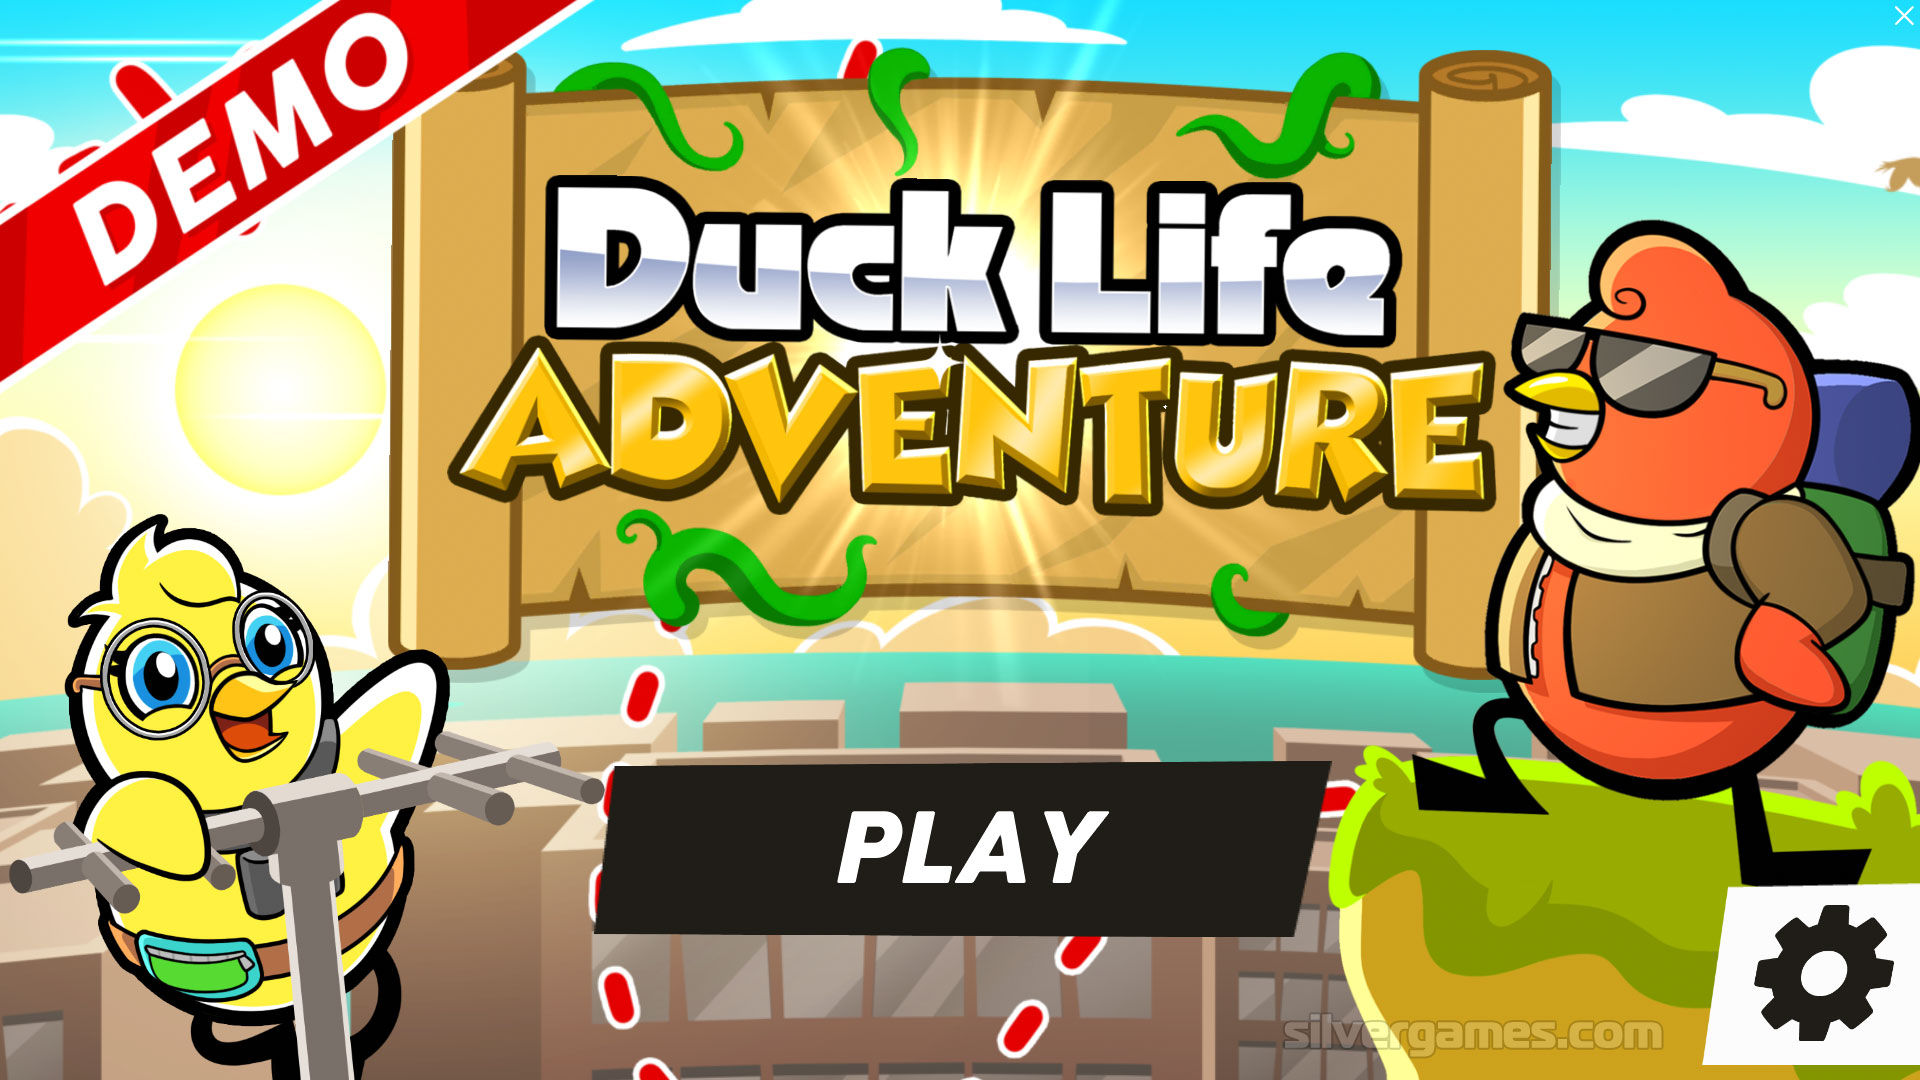 Duck Life 2 - Play Online on SilverGames 🕹️